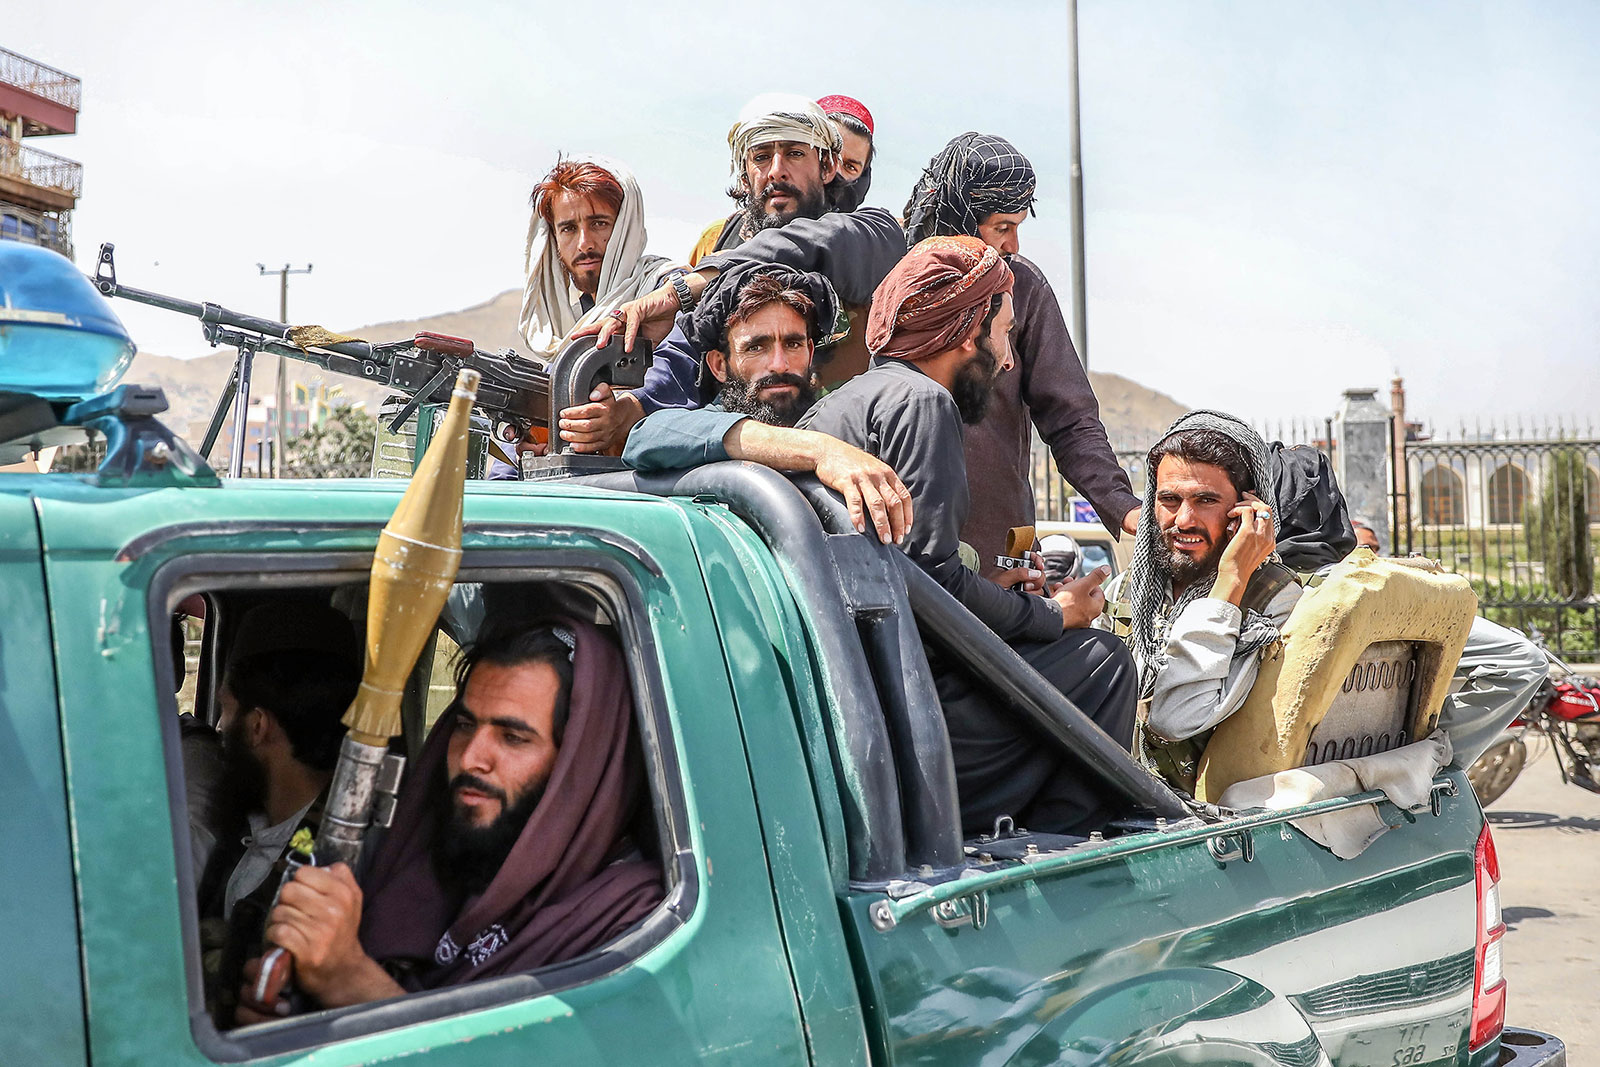 Taliban fighters are seen on the back of a vehicle in Kabul on August 16.